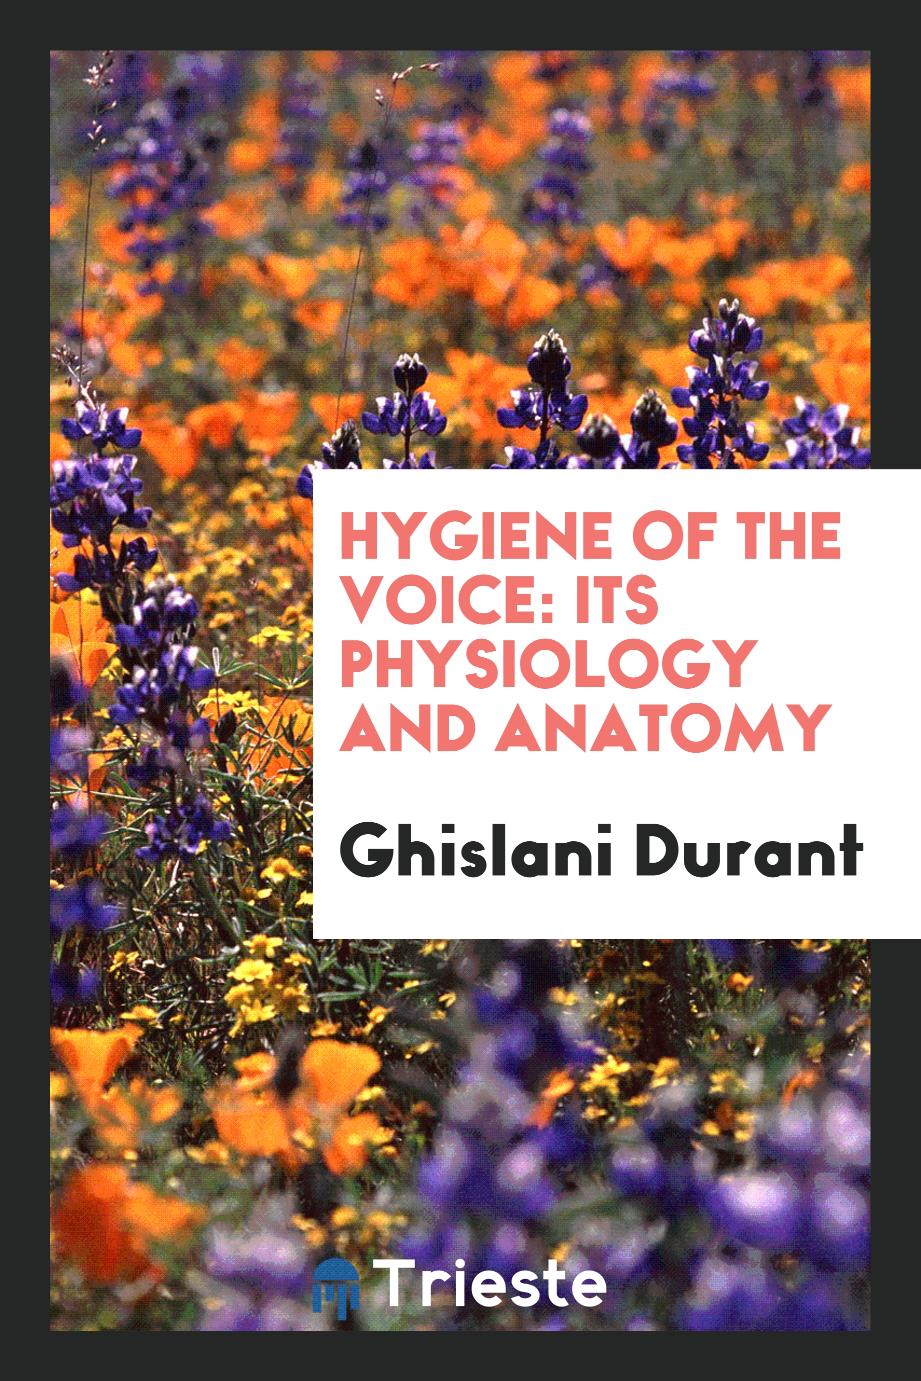 Hygiene of the Voice: Its Physiology and Anatomy